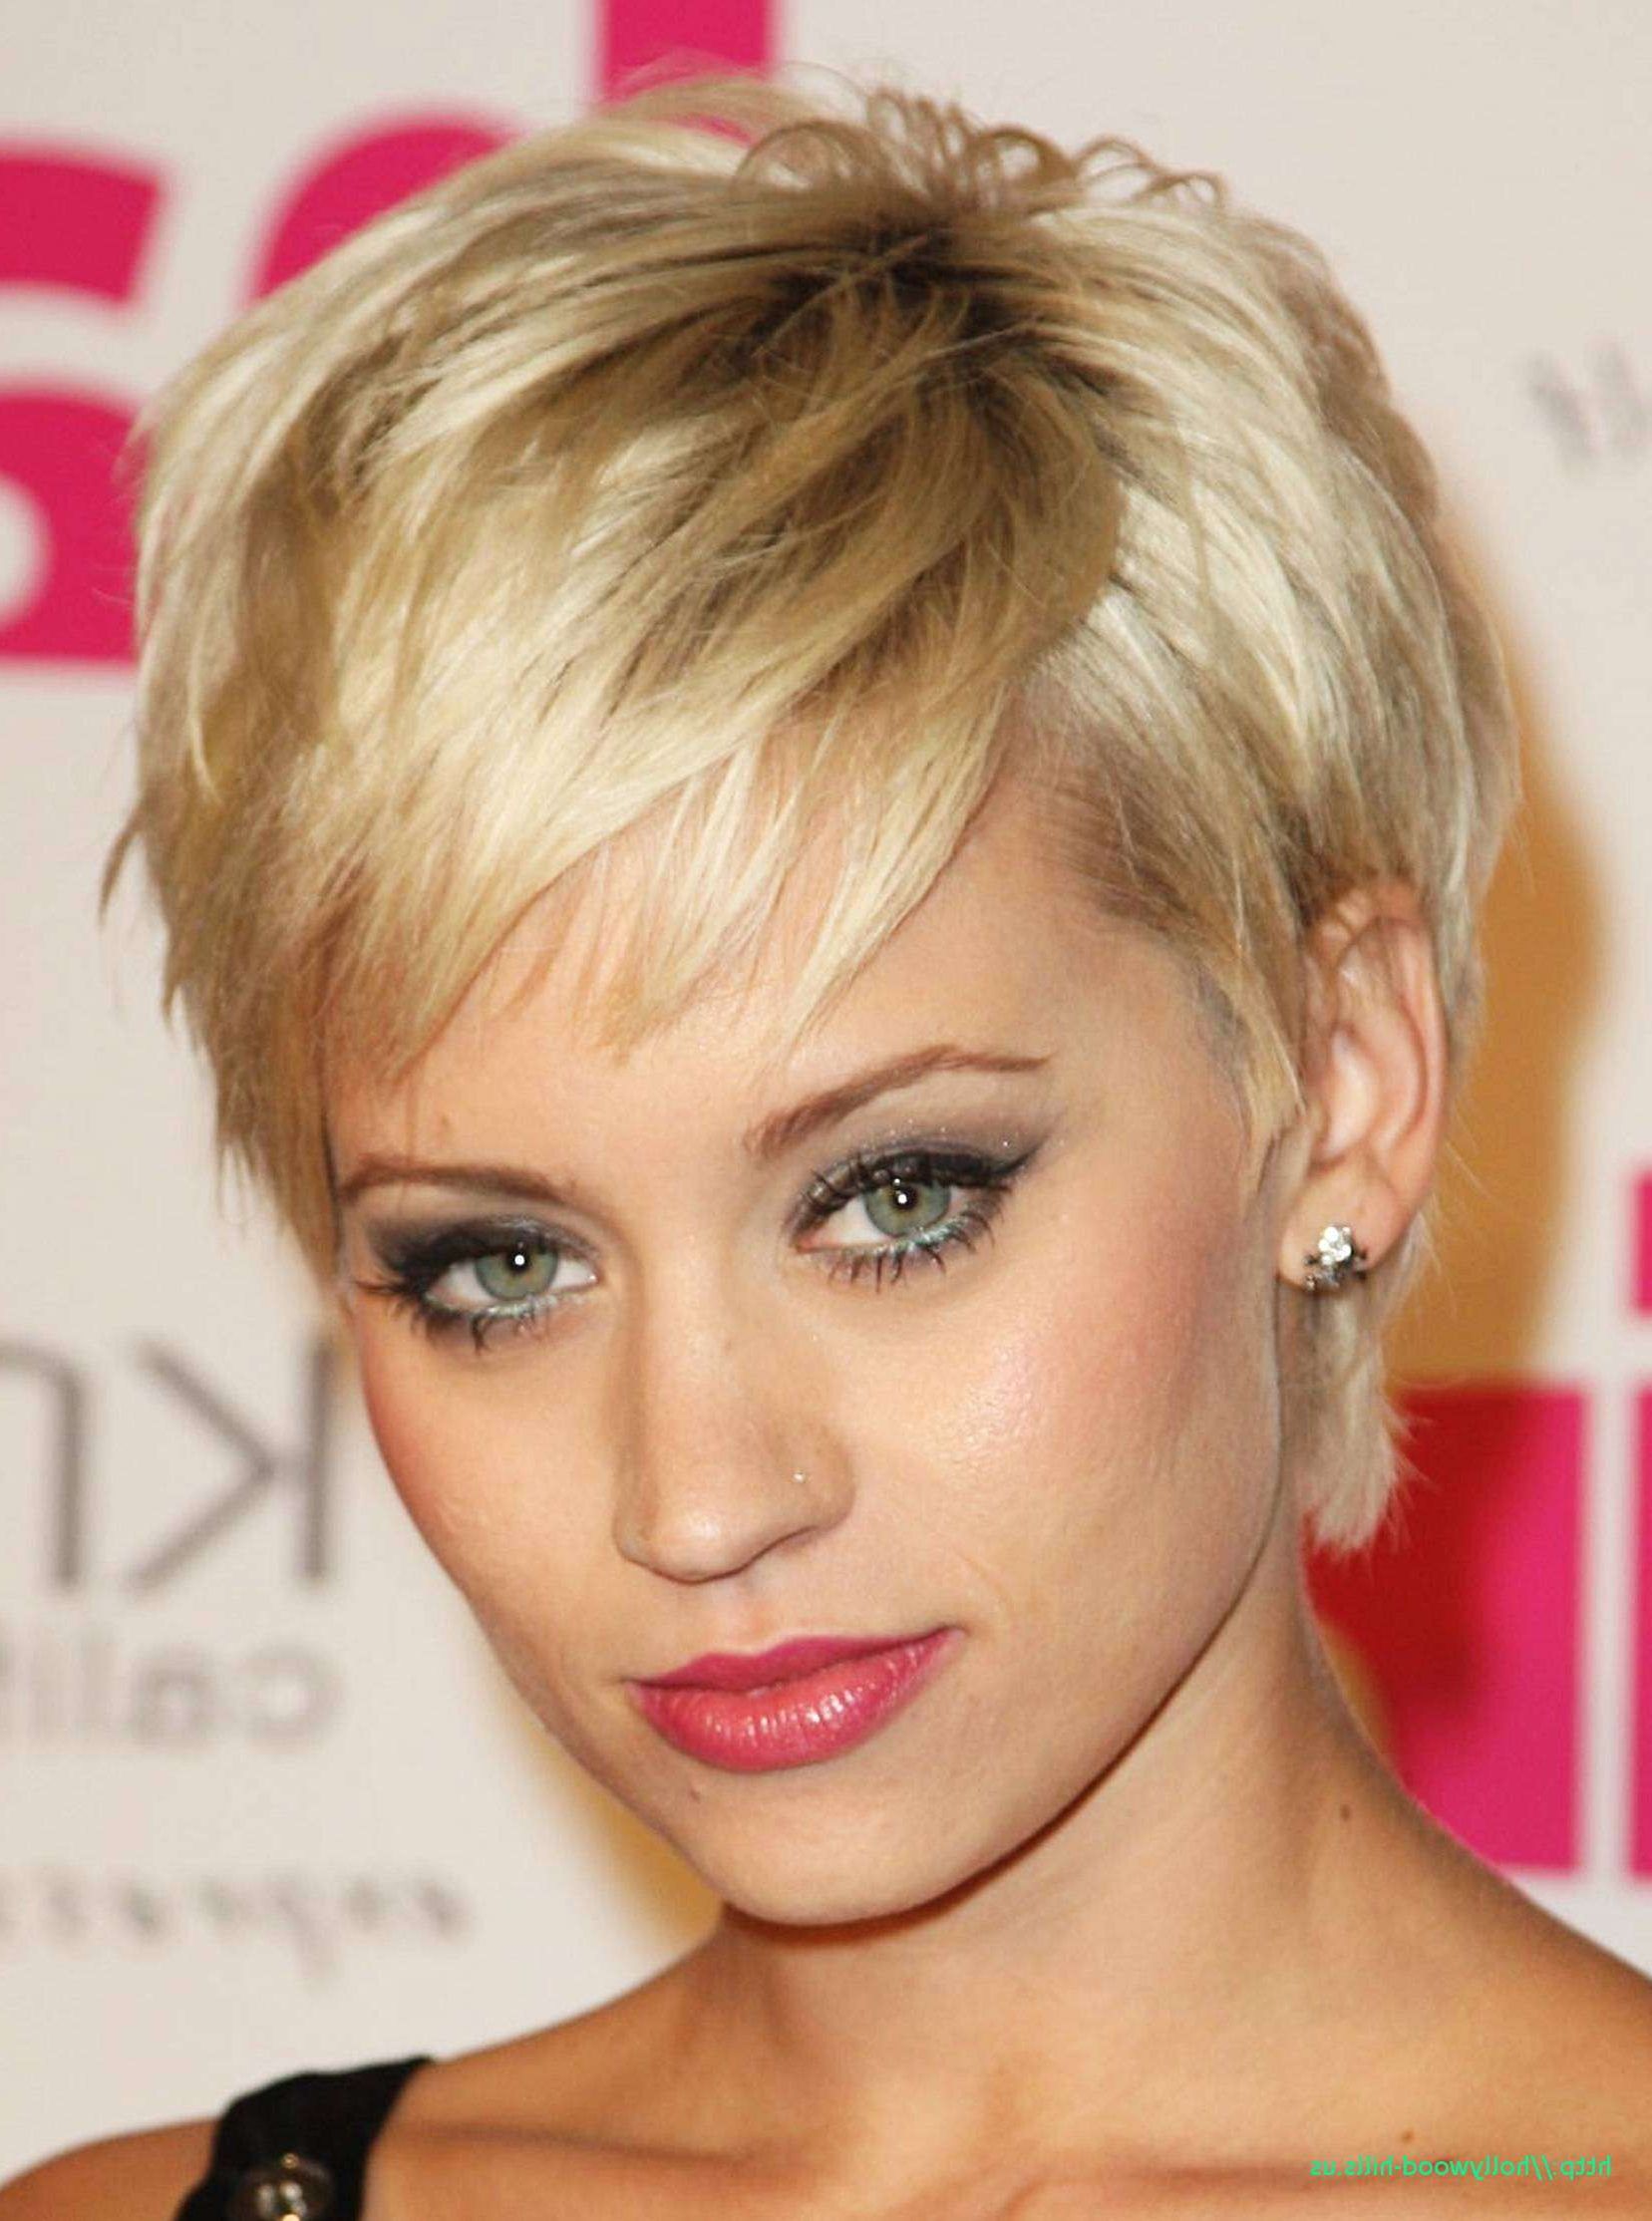 Blonde Hairstyles To Make You Look Younger Inspirational Short Intended For Short Hairstyles That Make You Look Younger (View 9 of 25)